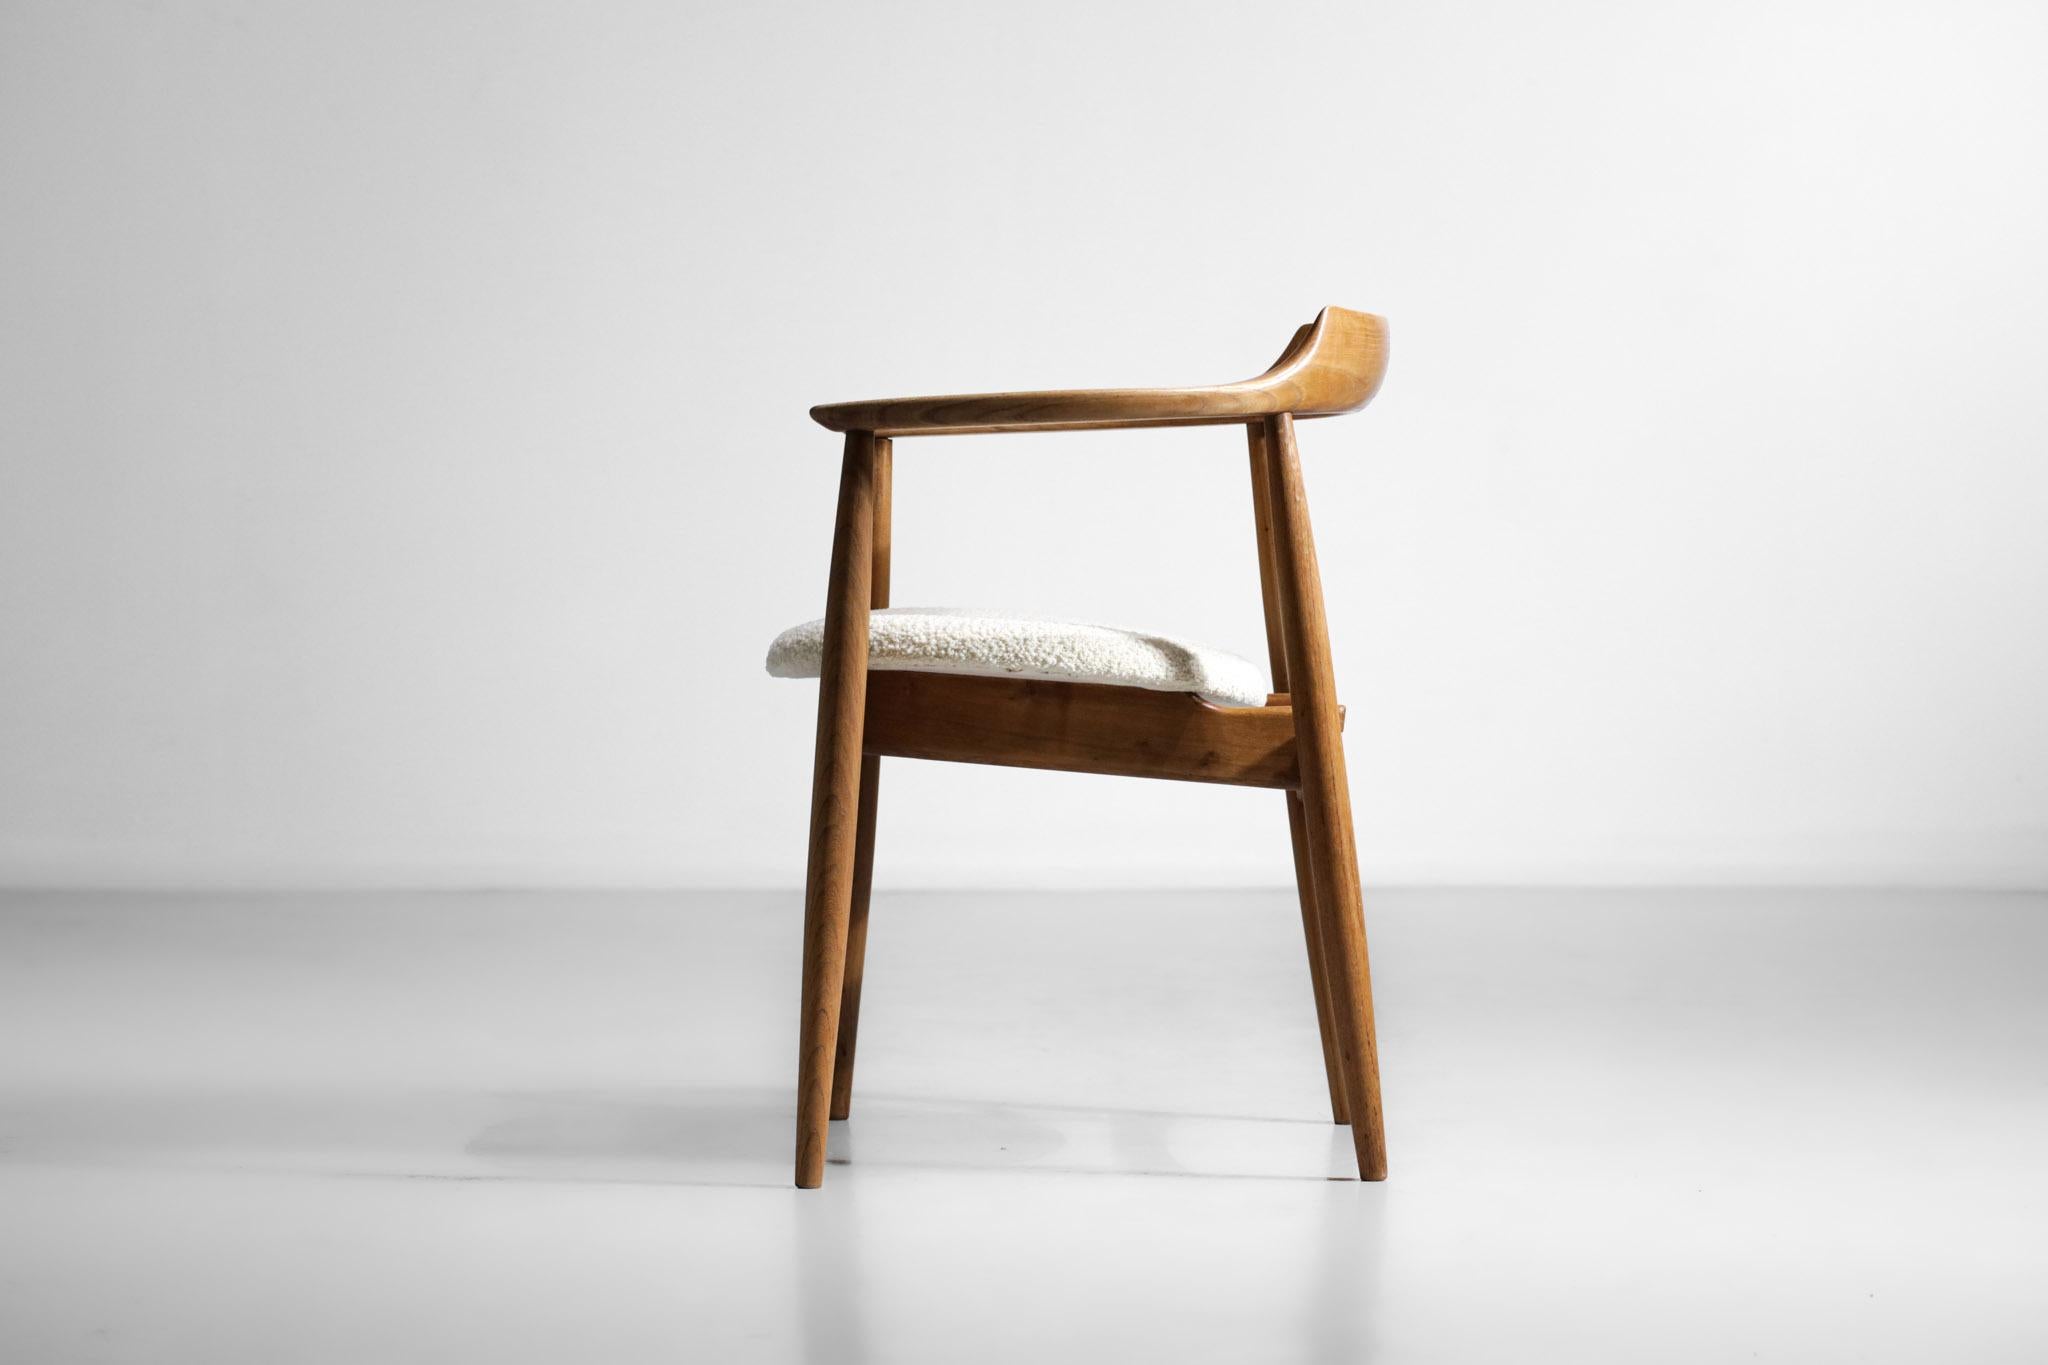 Scandinavian armchair from the 60's, in the style of Hans Wegner's work. Solid light oak structure, seat refurbished in white Brisson Bruneel wool. Very nice period work with pure and sober lines typical of Scandinavian design.